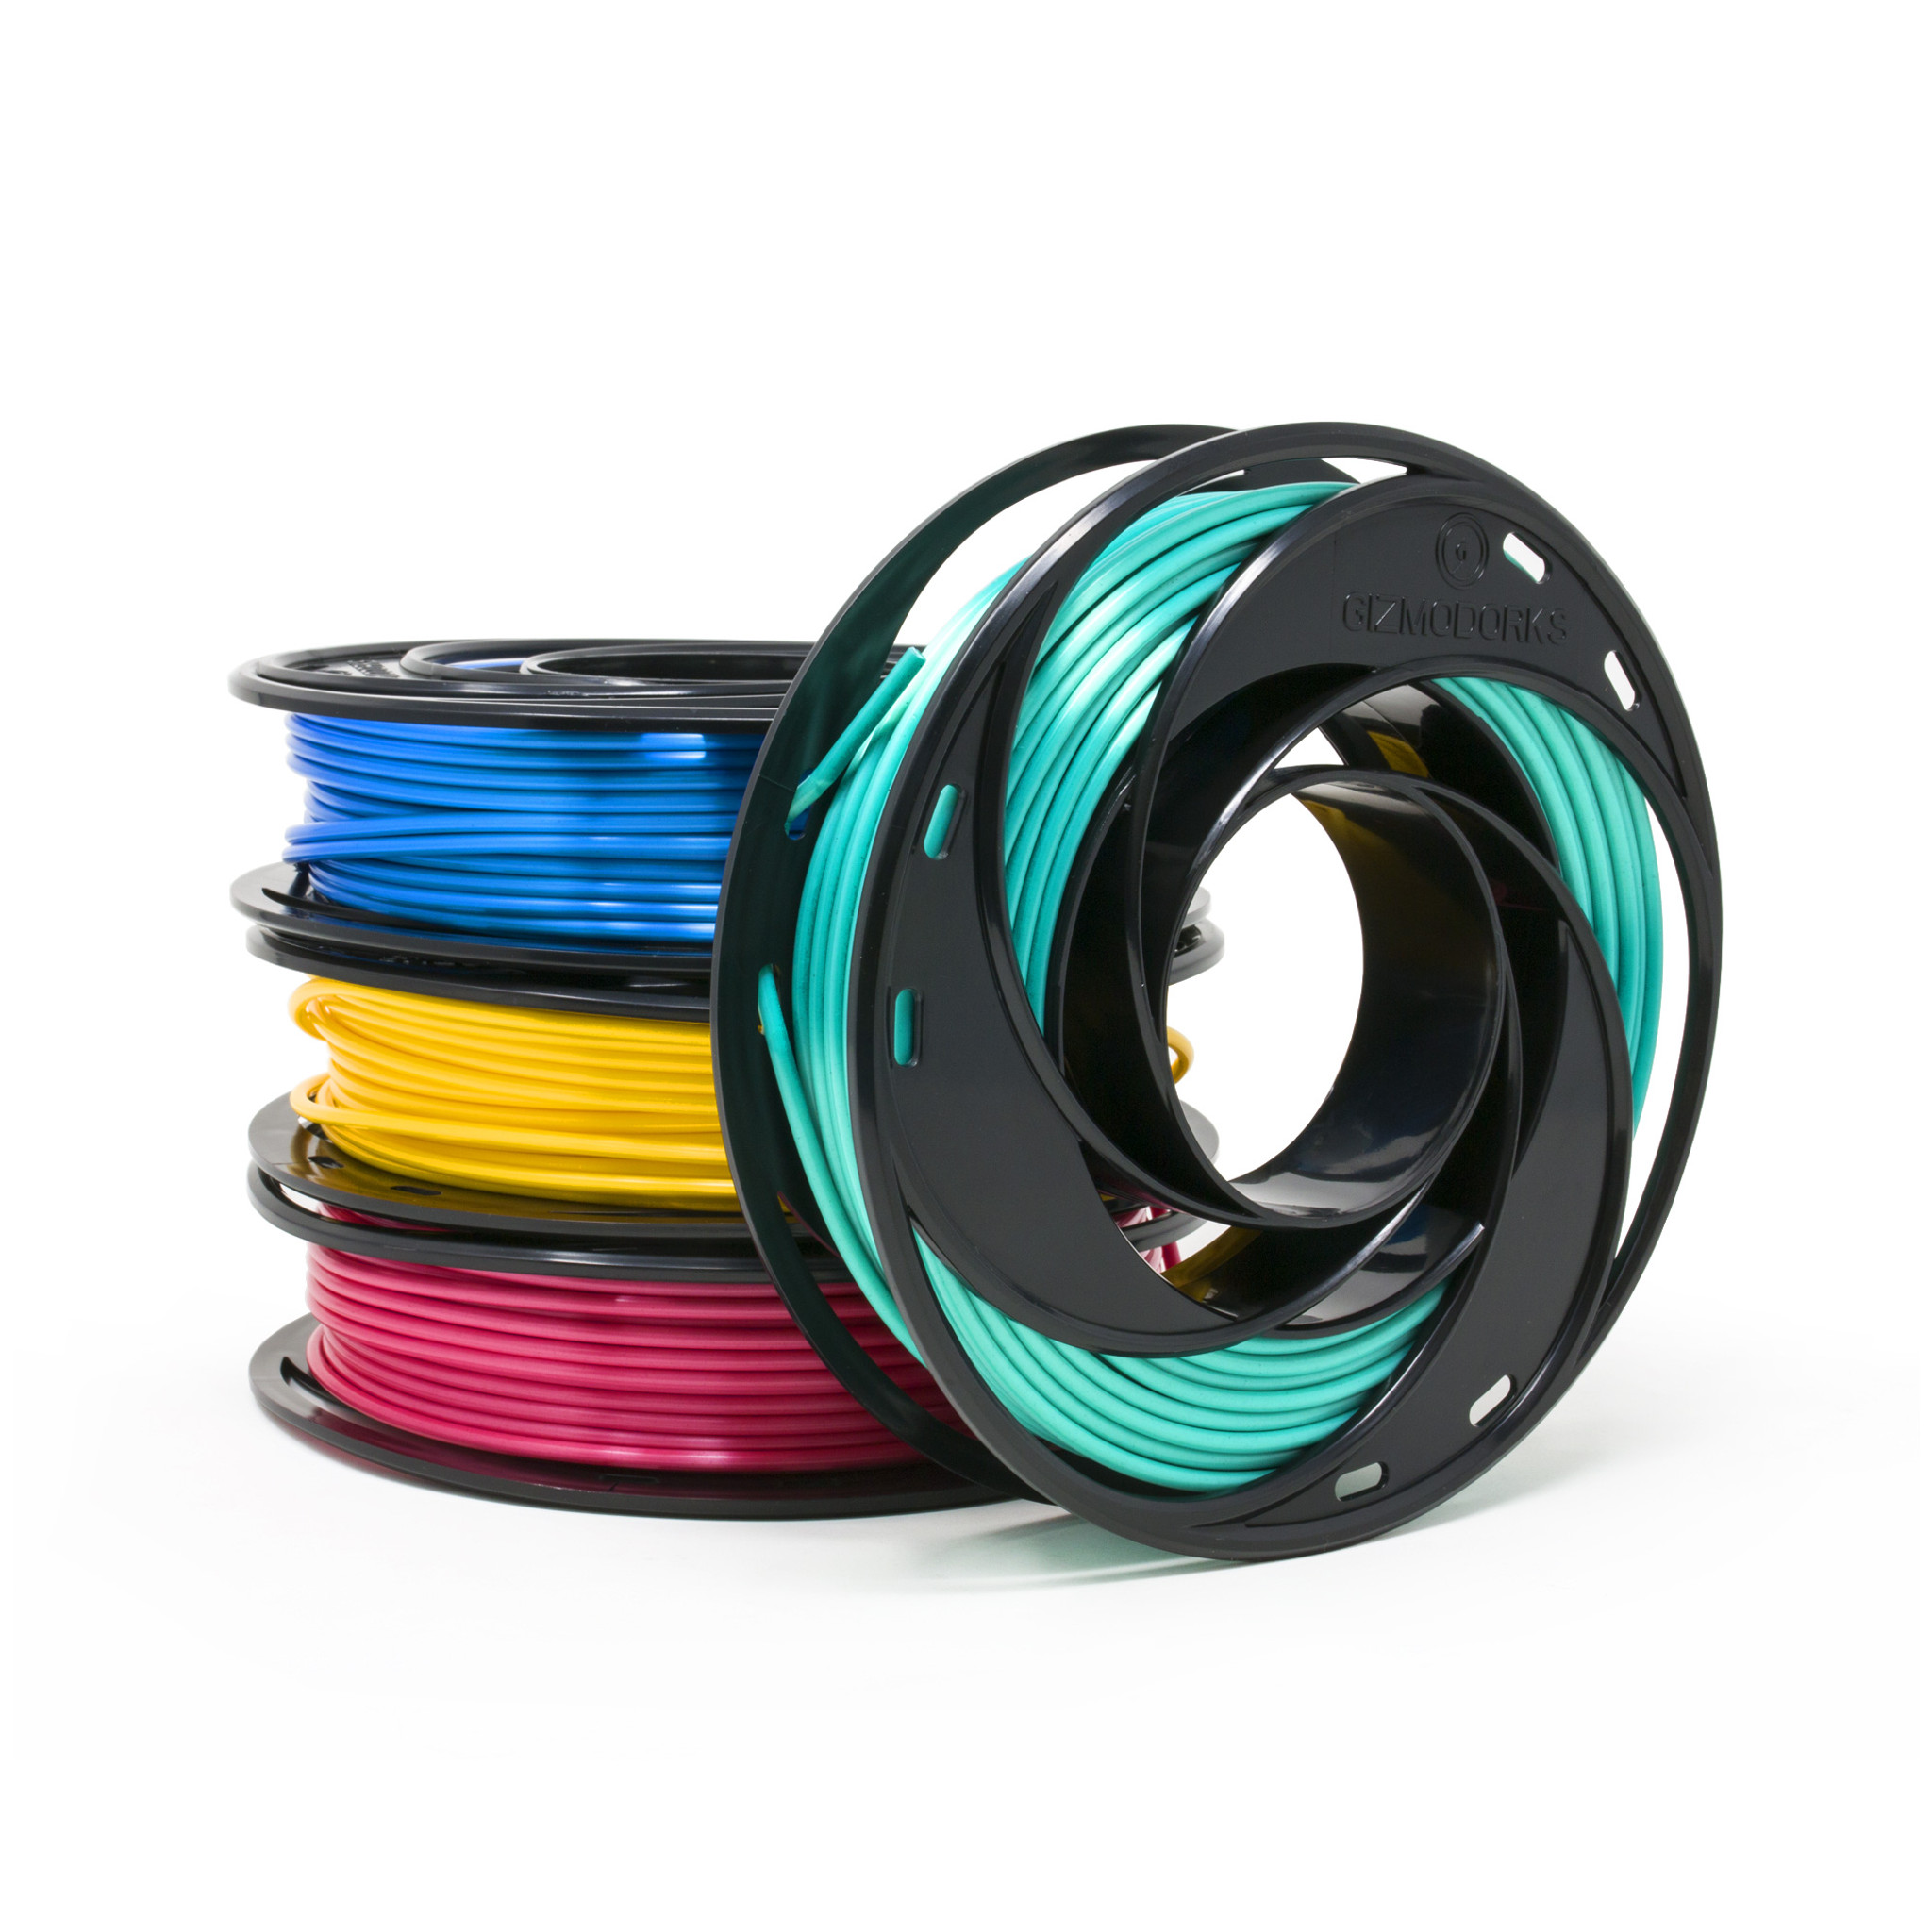 PACK PLA TRICOLORE SILK GLOSSY 250G 1.75 mm